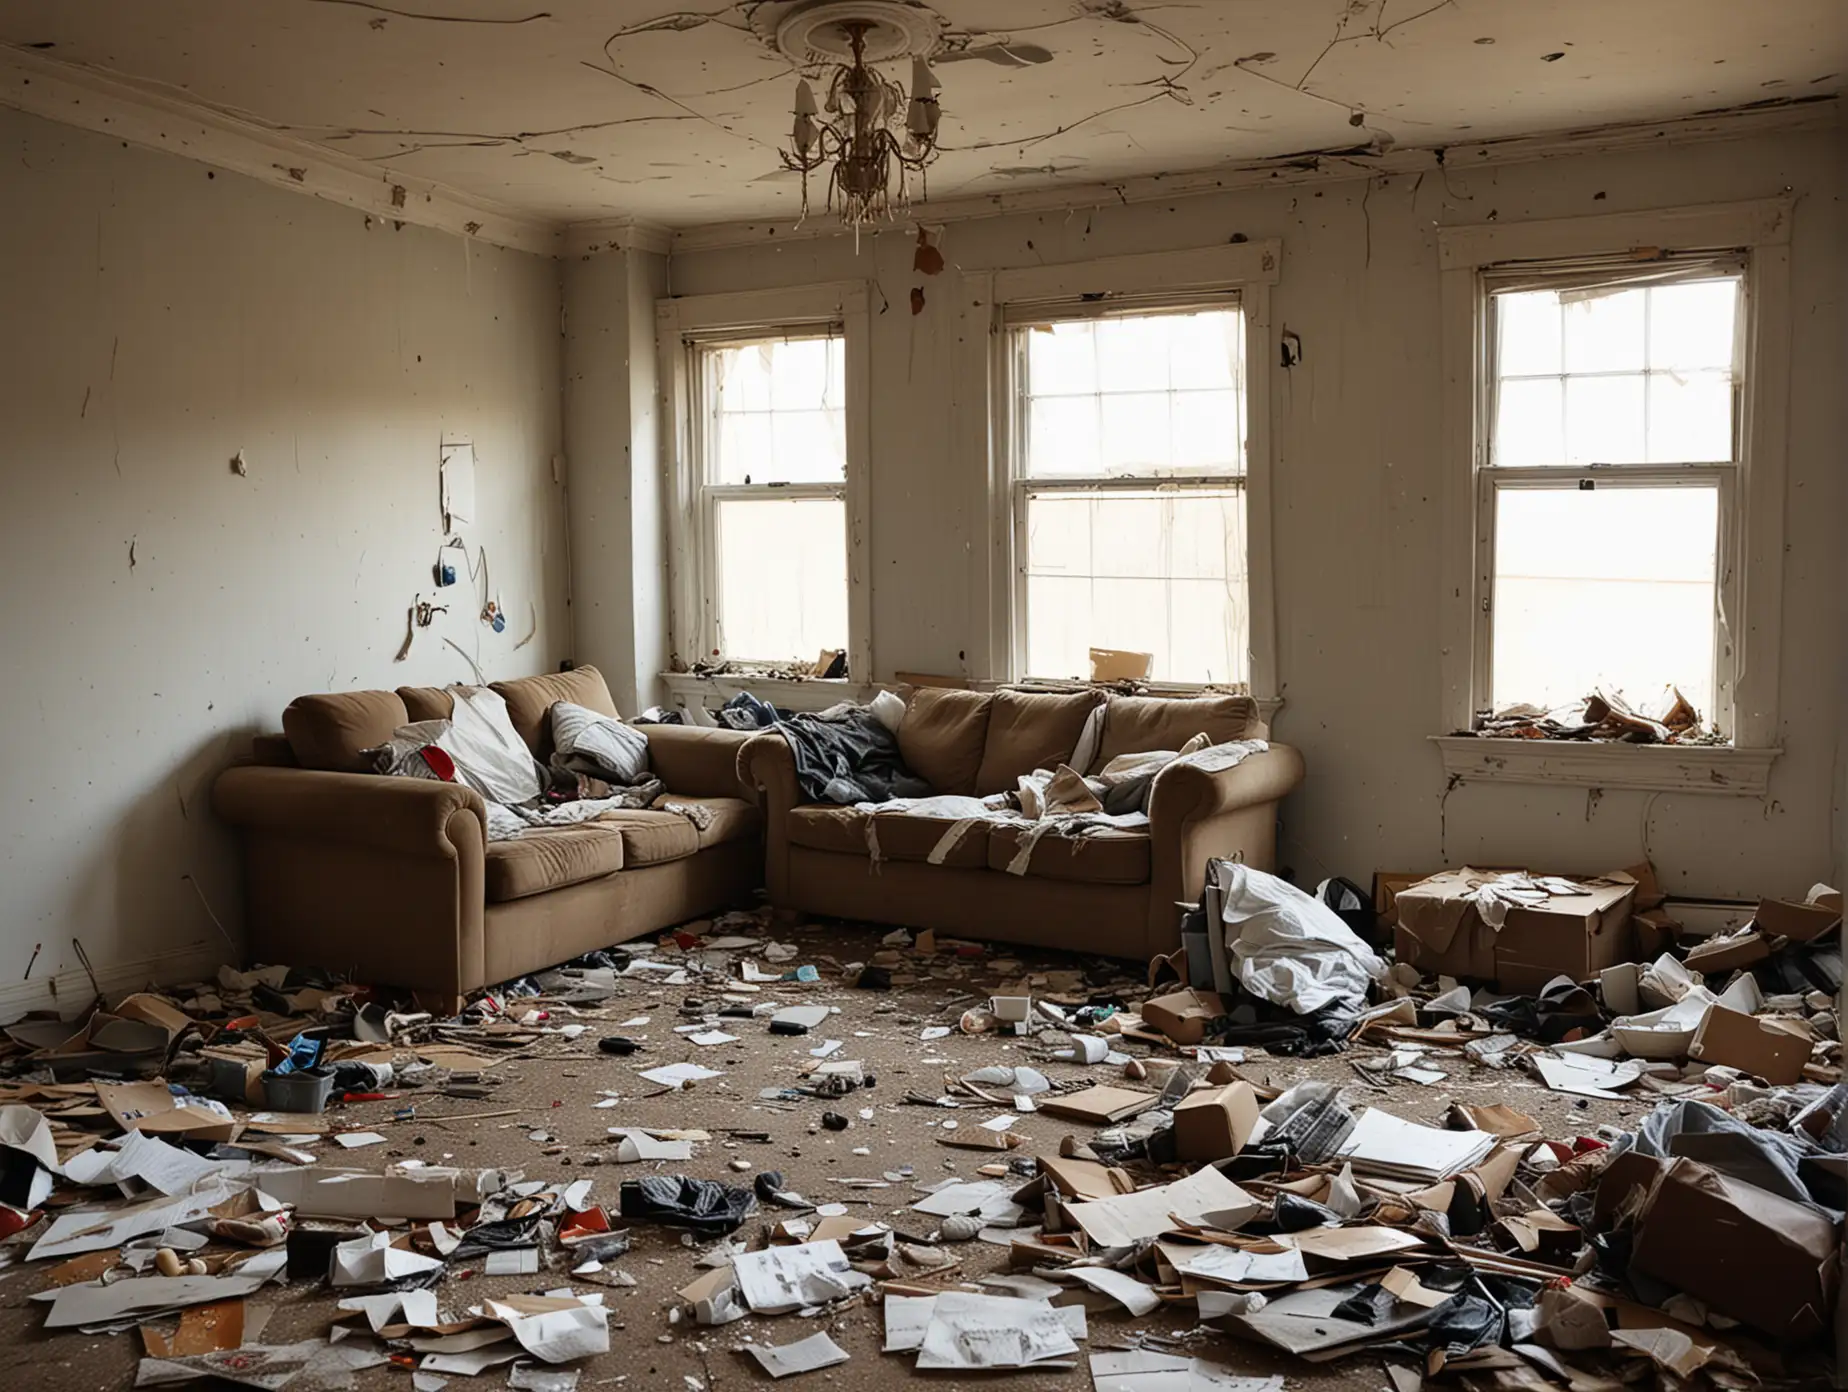 Chaos-in-a-Trashed-Living-Room-Disarray-and-Disorder-Captured-in-Art